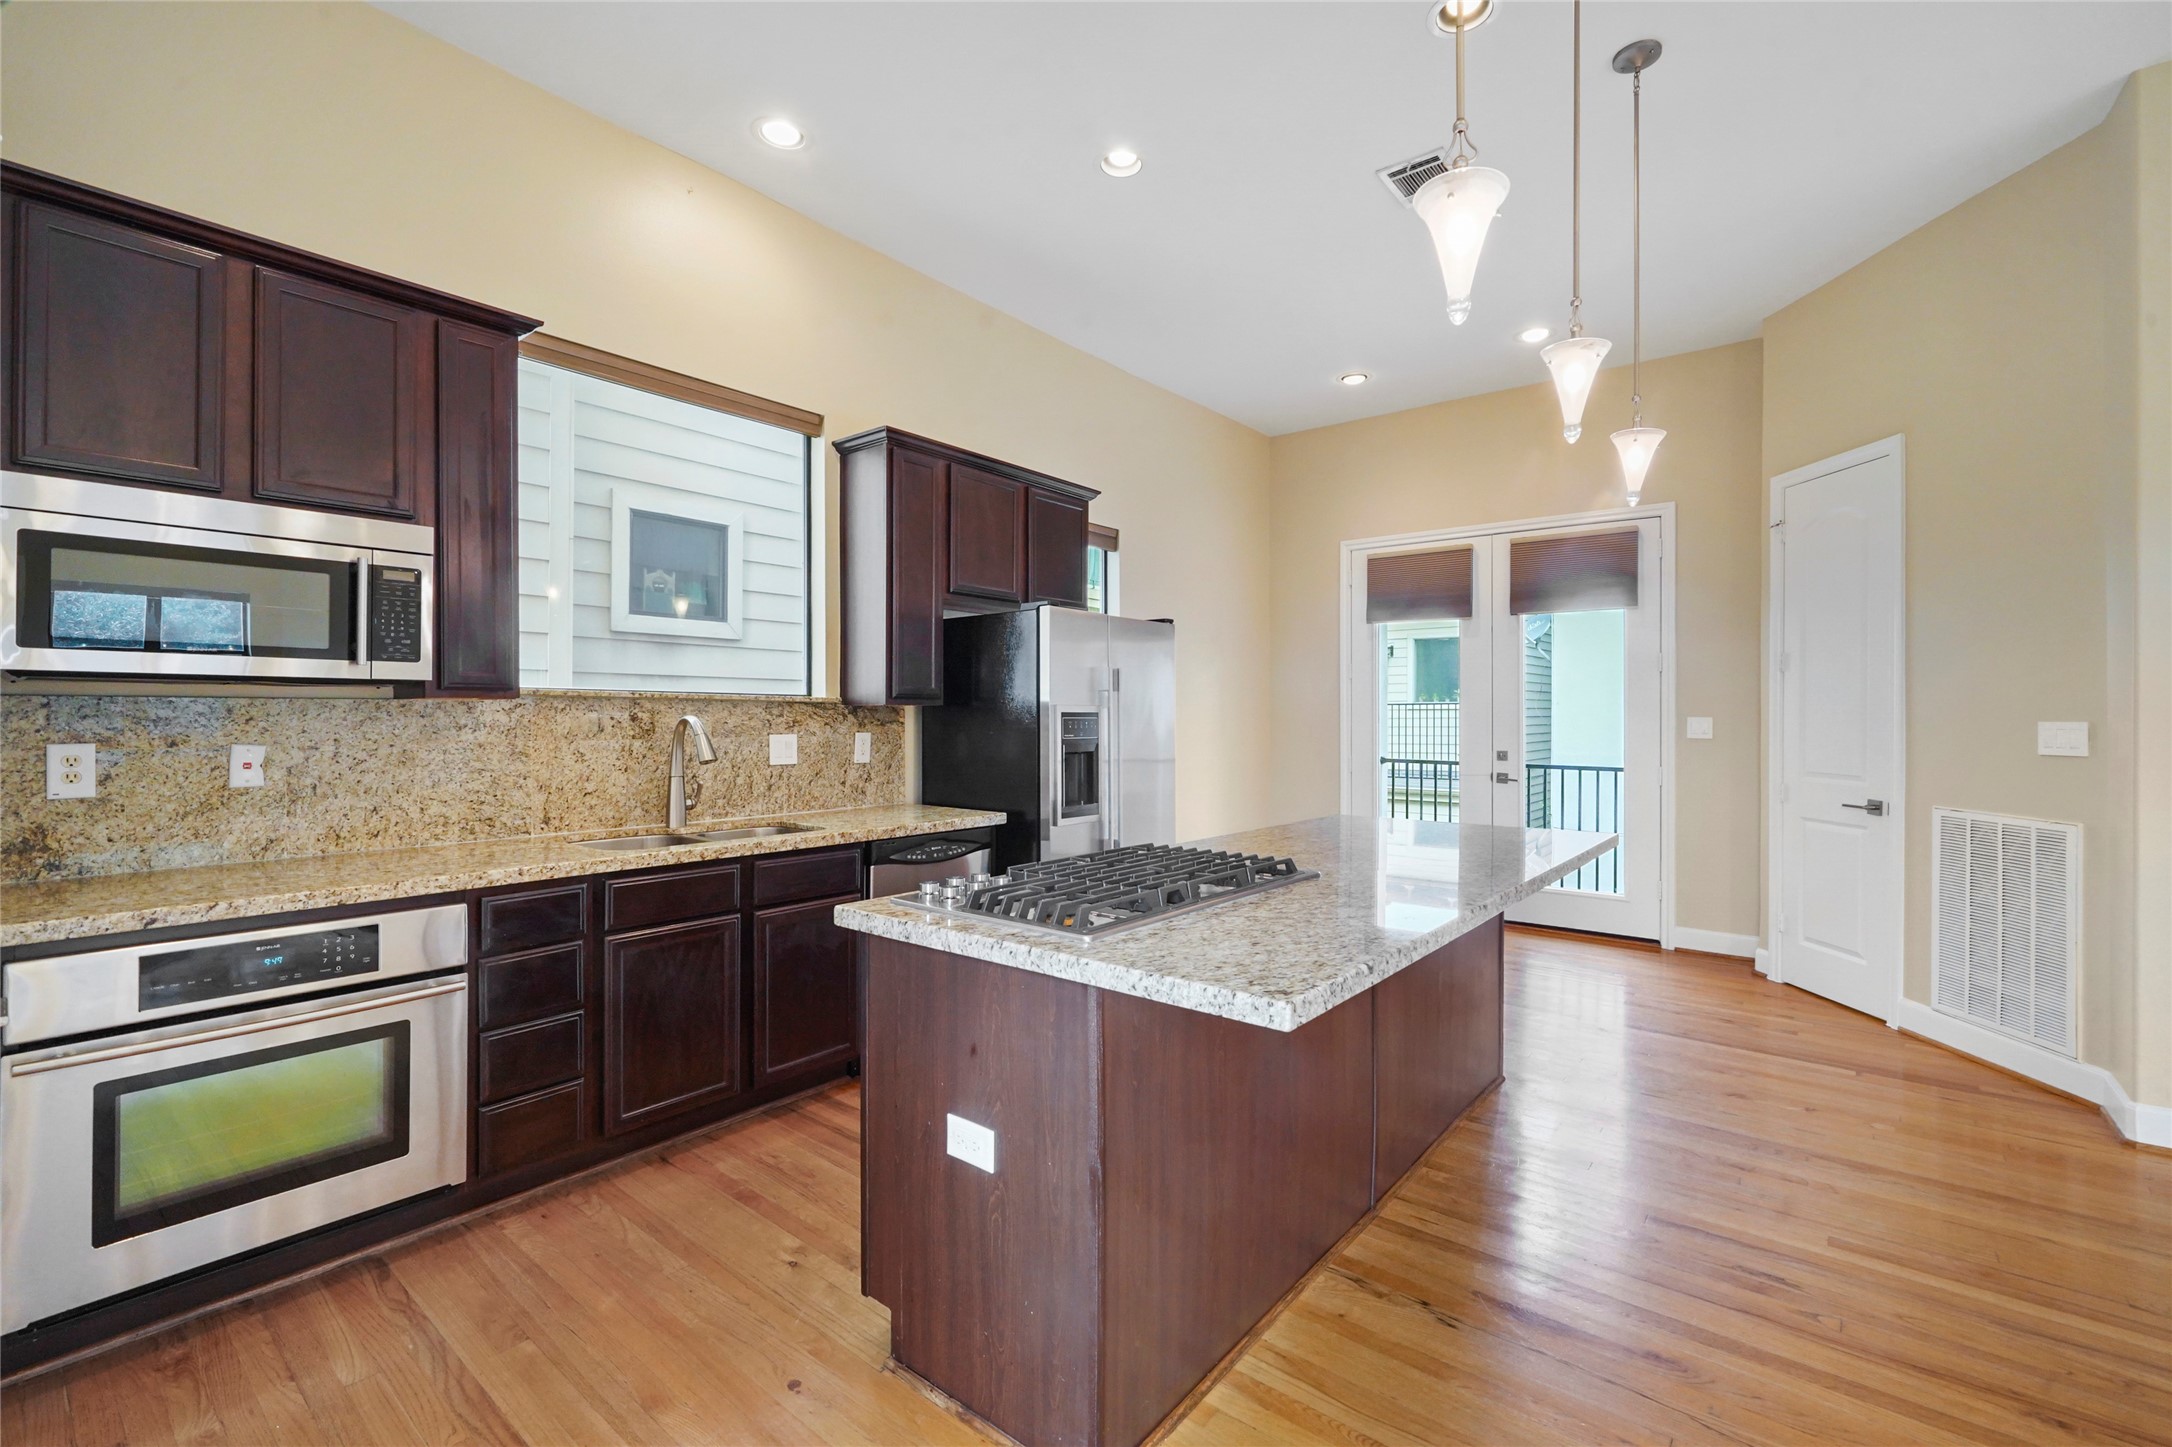 Kitchen with all high end stainless steel appliances.